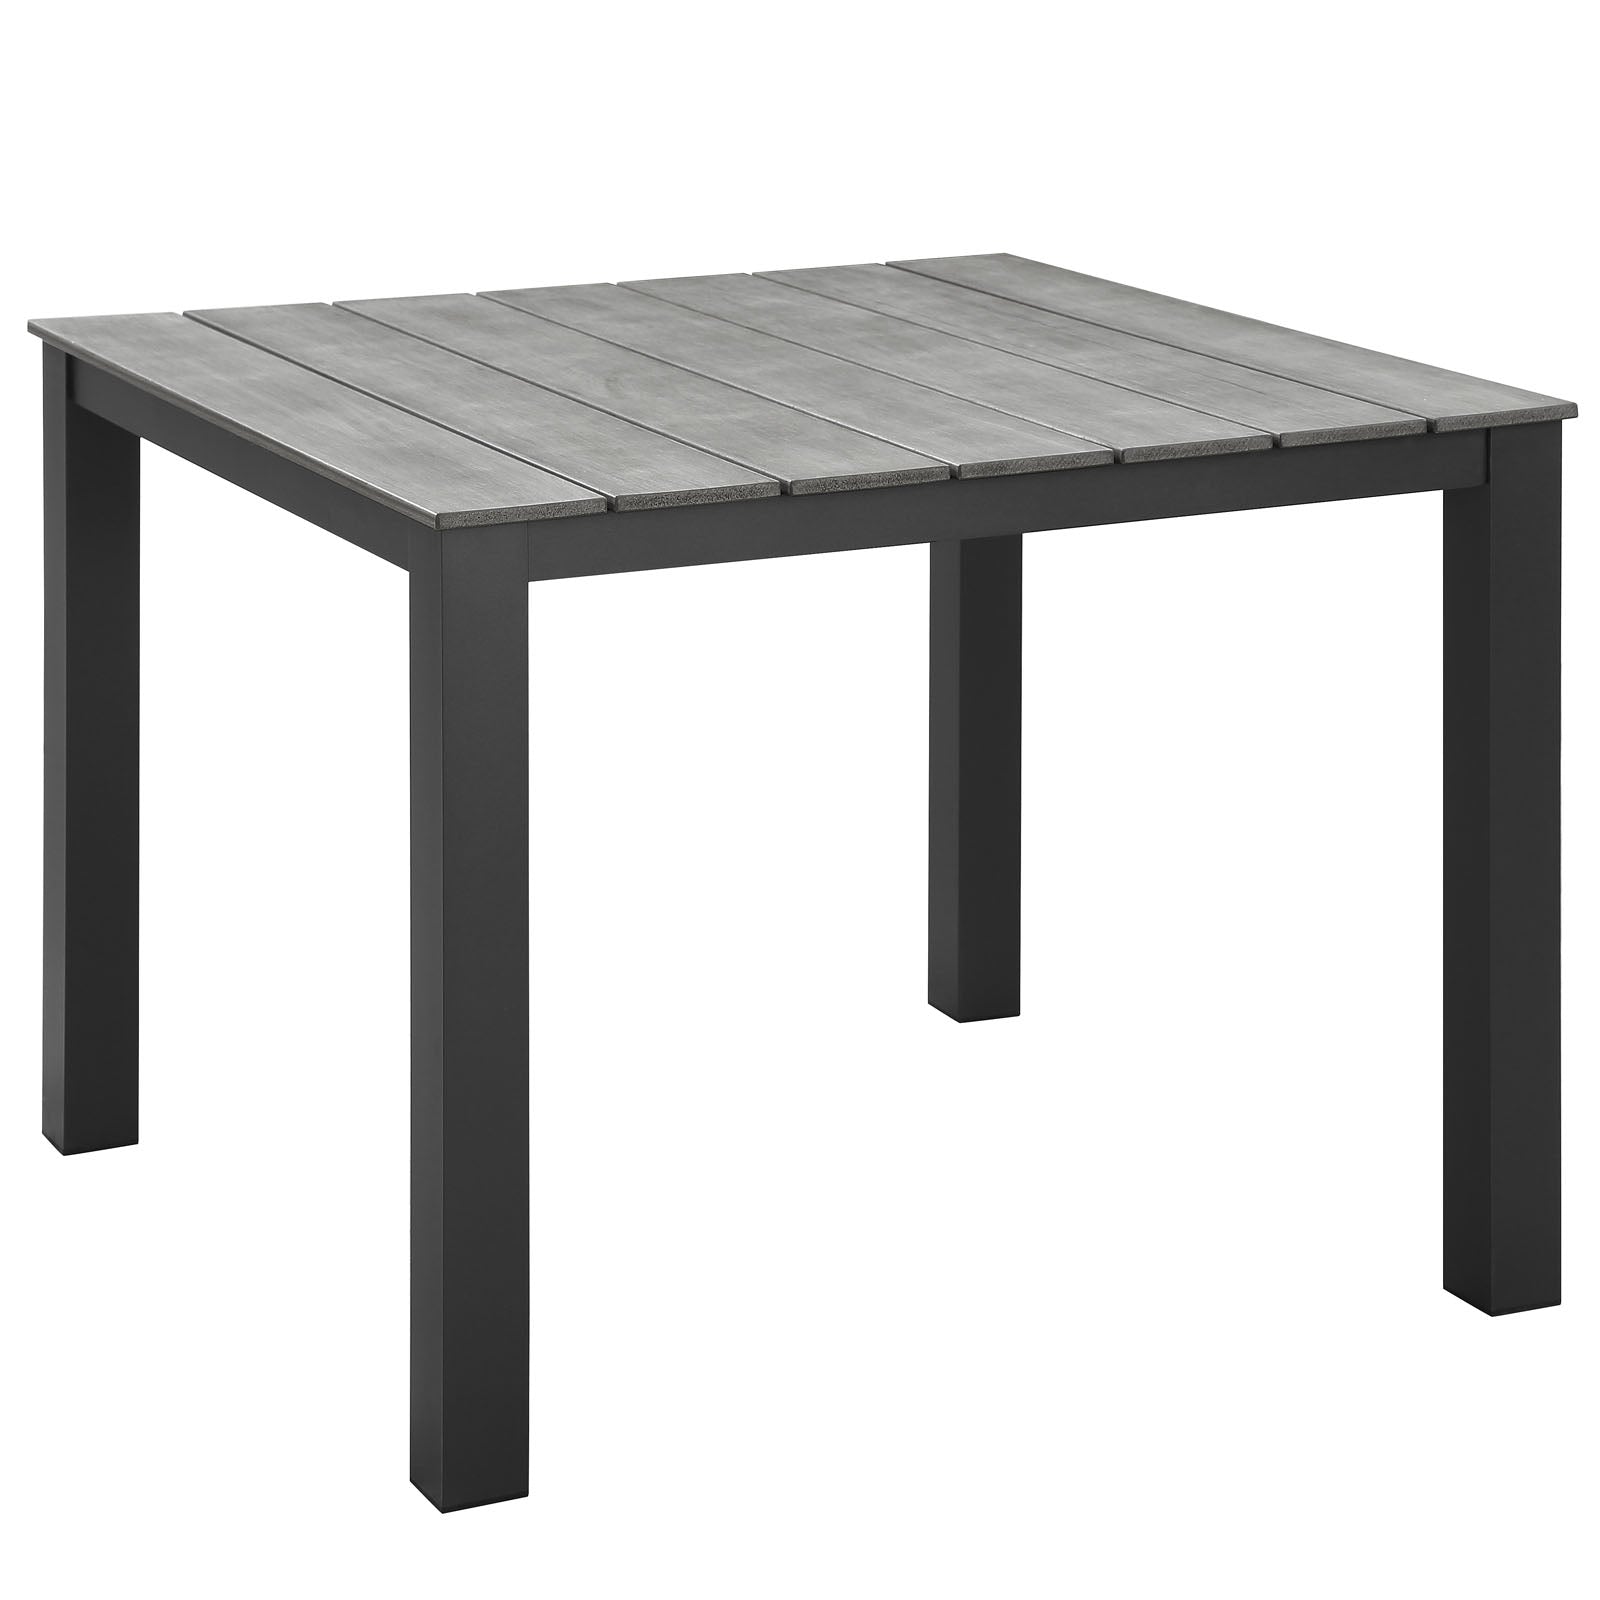 Maine Outdoor Patio Dining Table